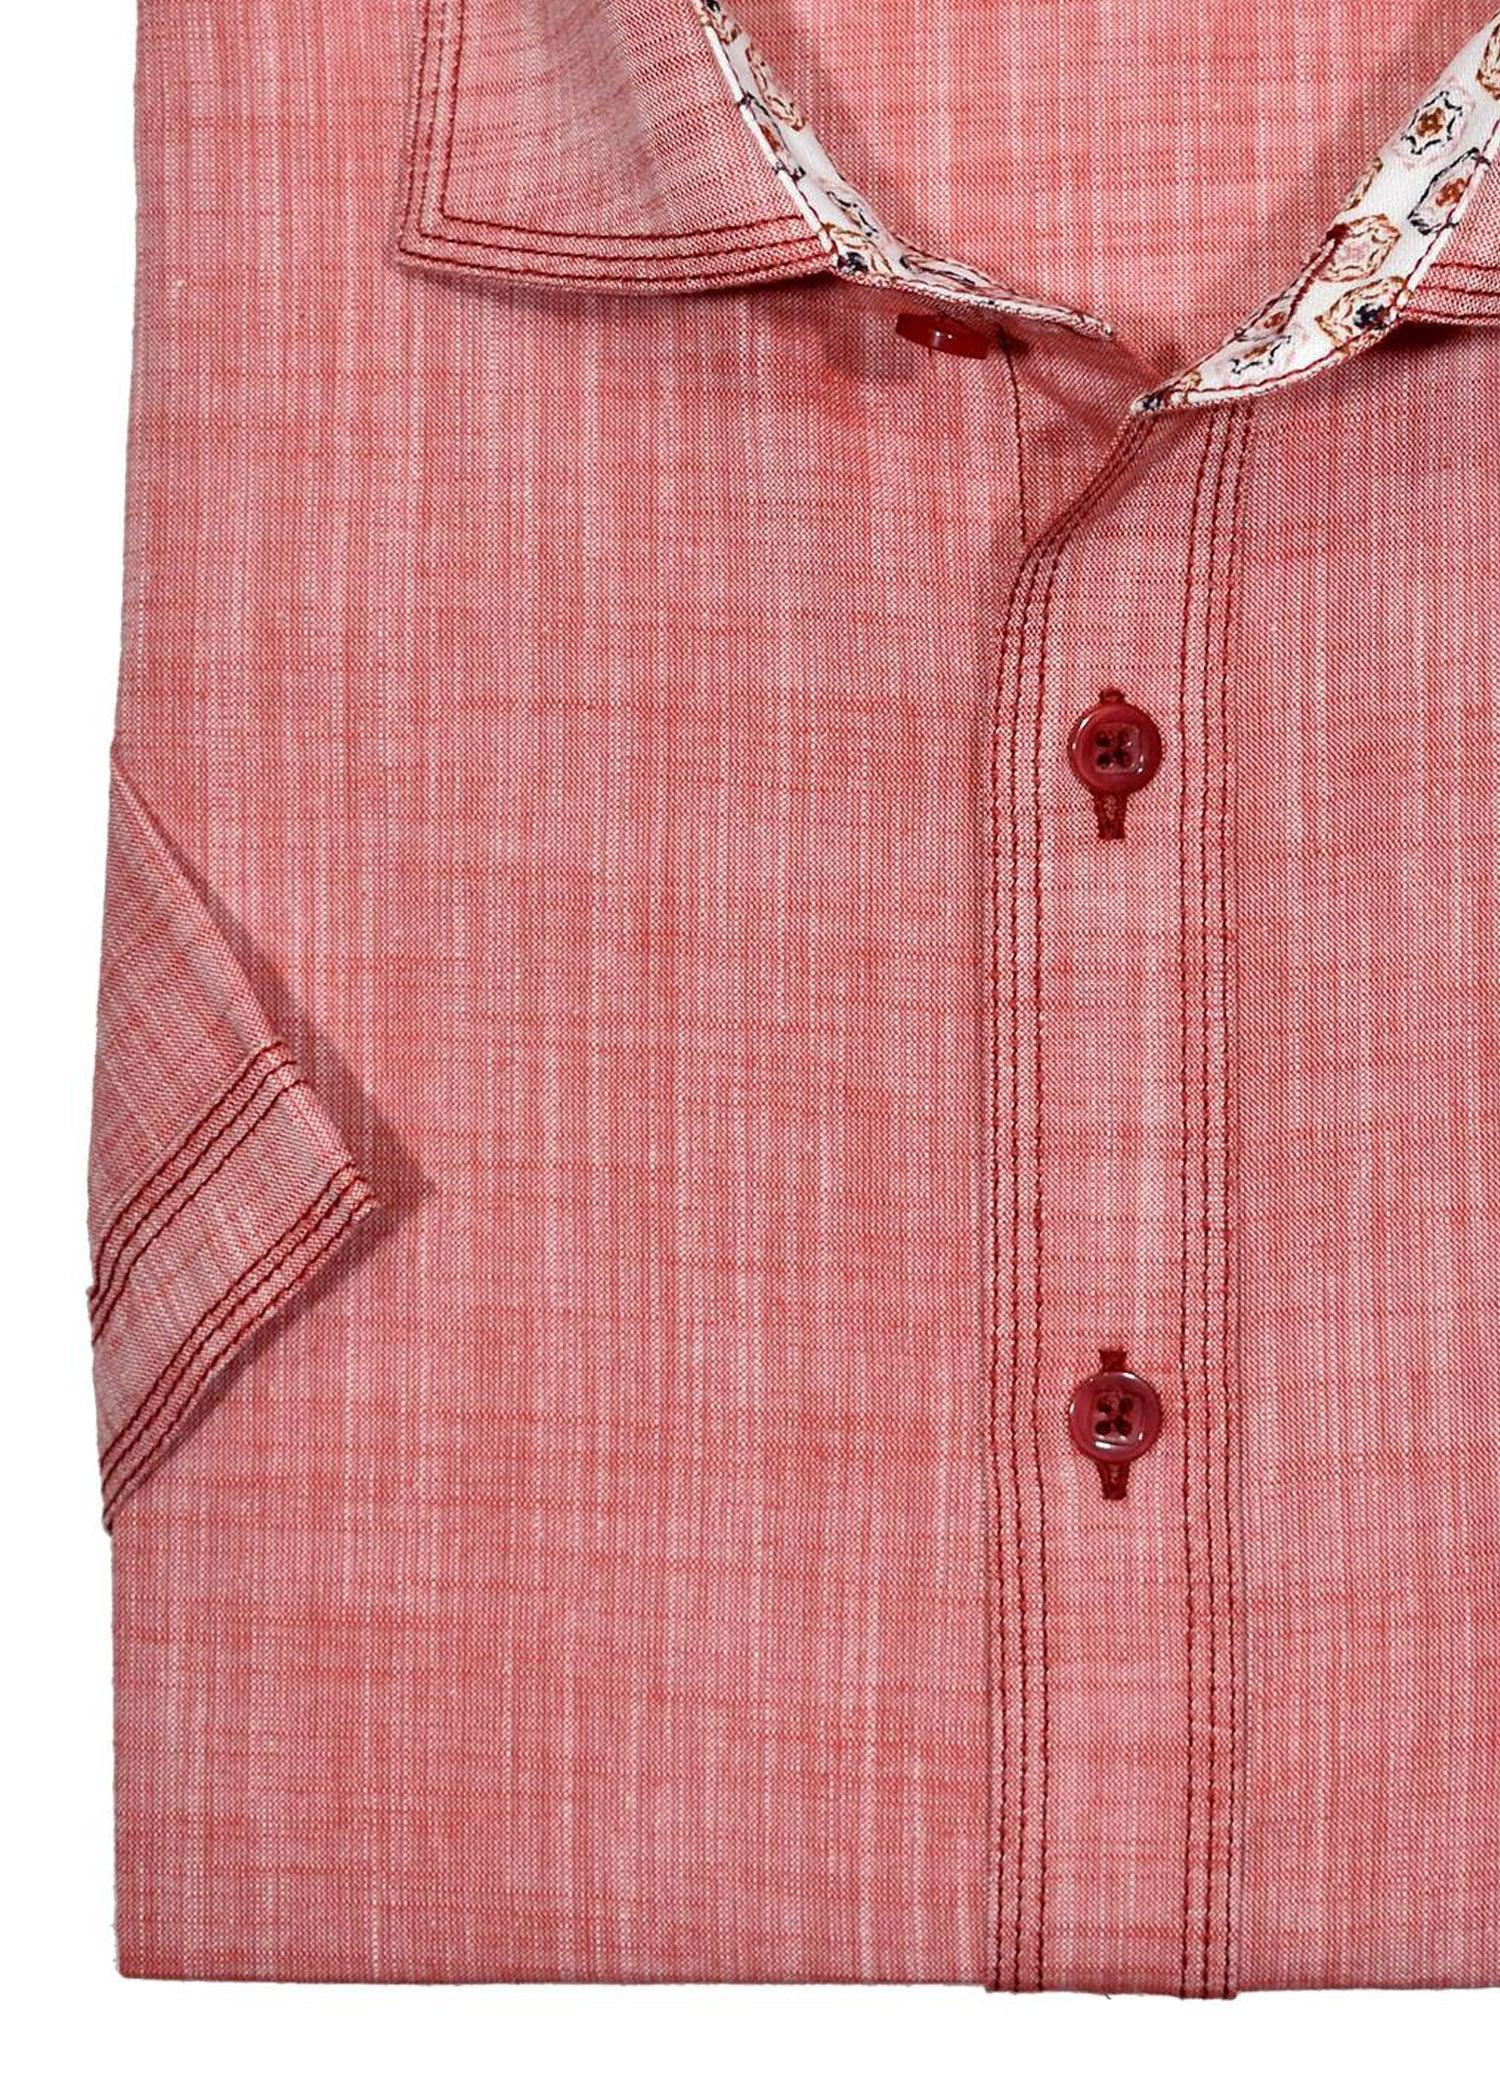 Marcello Sport classic short sleeve cotton linen fabric is crafted to reduce wrinkling.  The shirt features our signature triple stitch detailing, matched buttons and complimentary trim fabrics.  Soft cotton blended fabric, woven to look like linen. Medium spread collar for a casual sport look. Trend chest pocket. Square bottom with side slit vents. Classic shaped fit for a slim to moderate build. Shirt by Marcello.